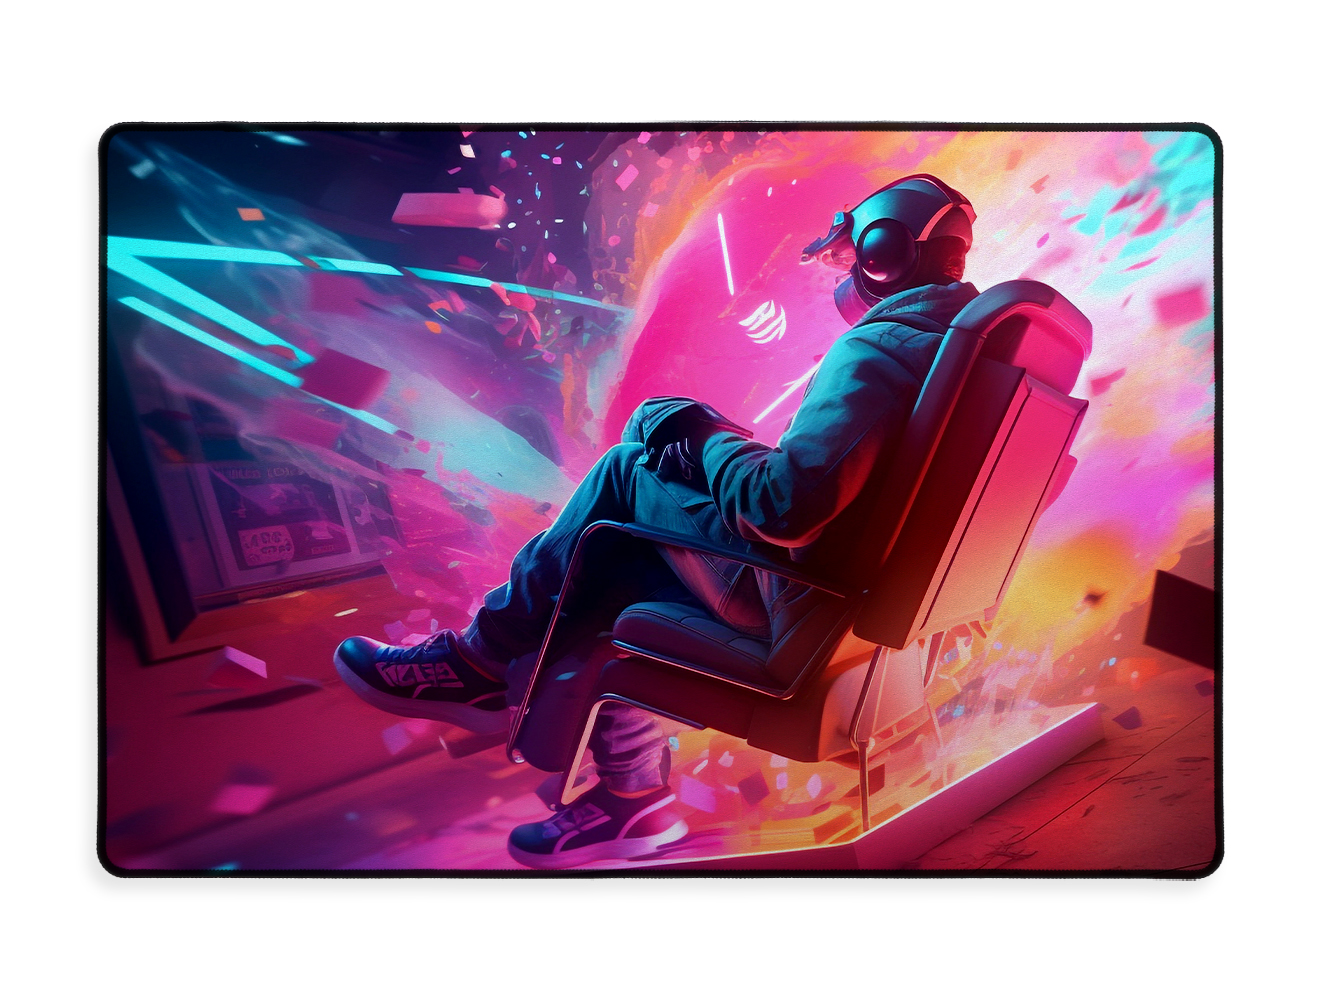 Sublimation Gaming Mouse Pad 800 x 400 x 3 mm - White Men in Chair